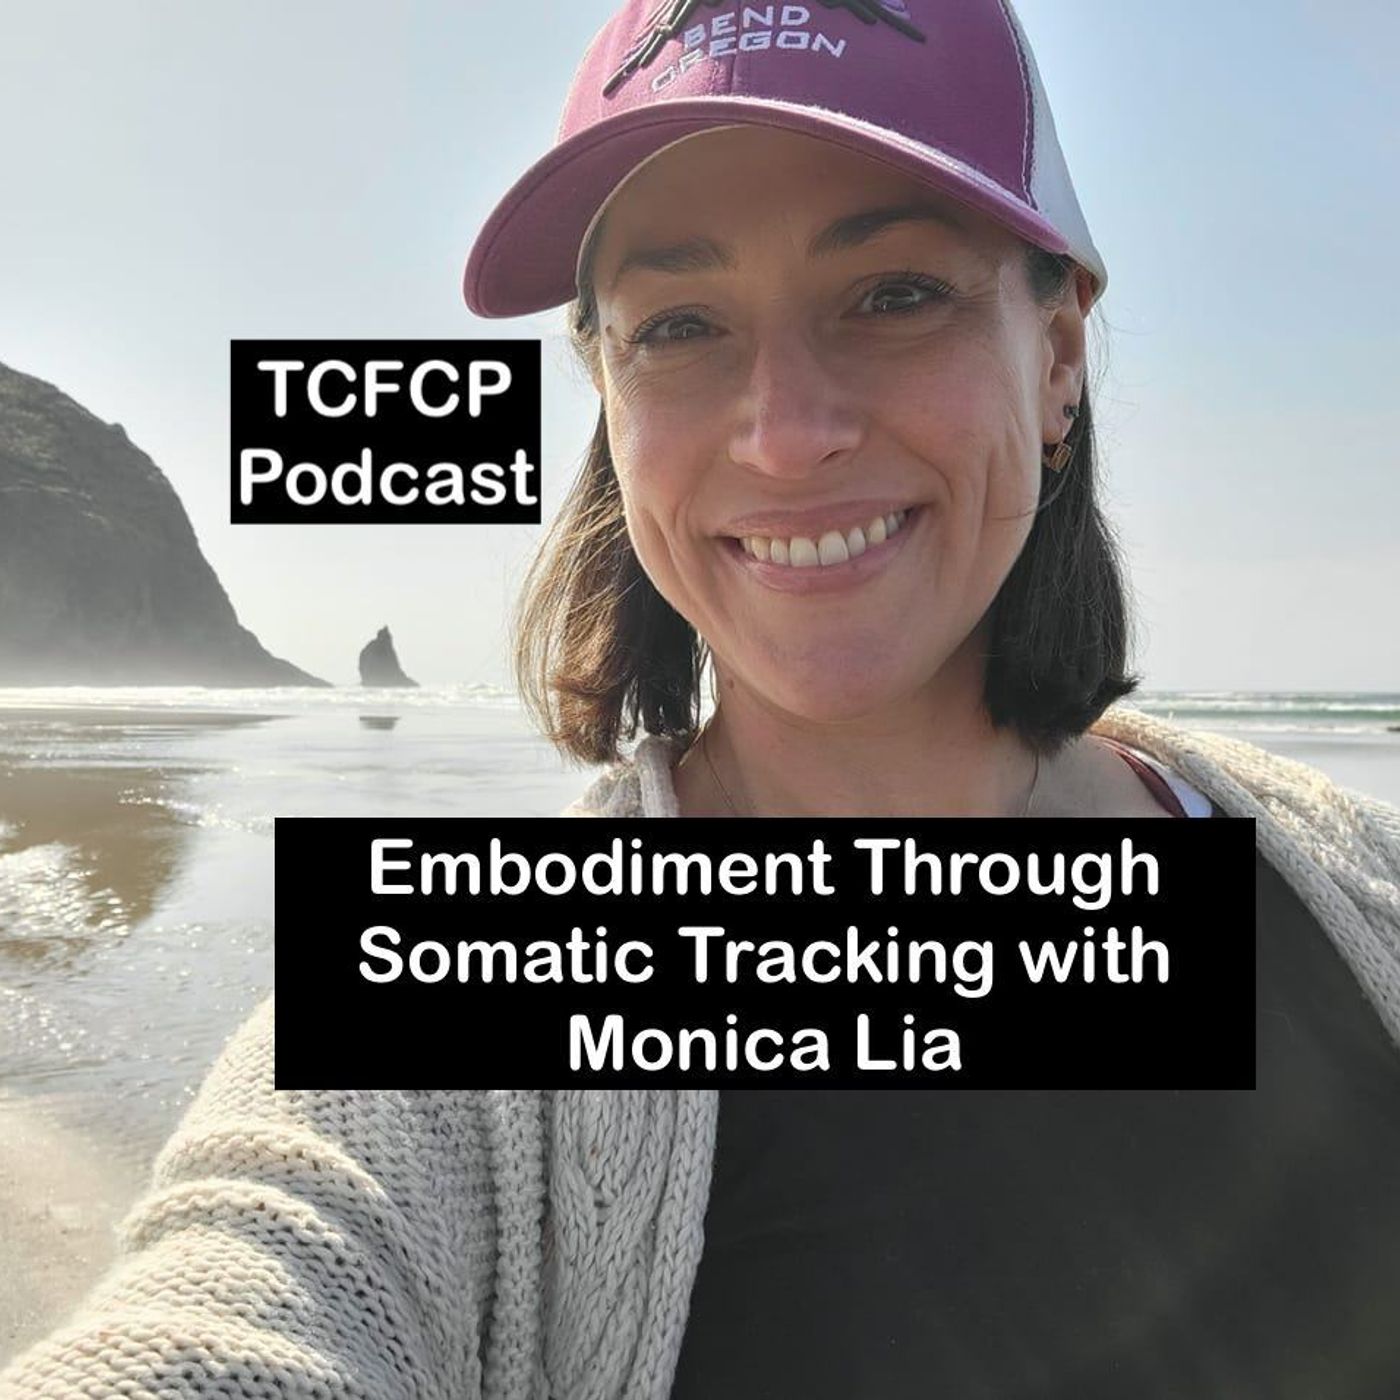 S3 Ep86: Embodiment Through Somatic Tracking with Monica Lia